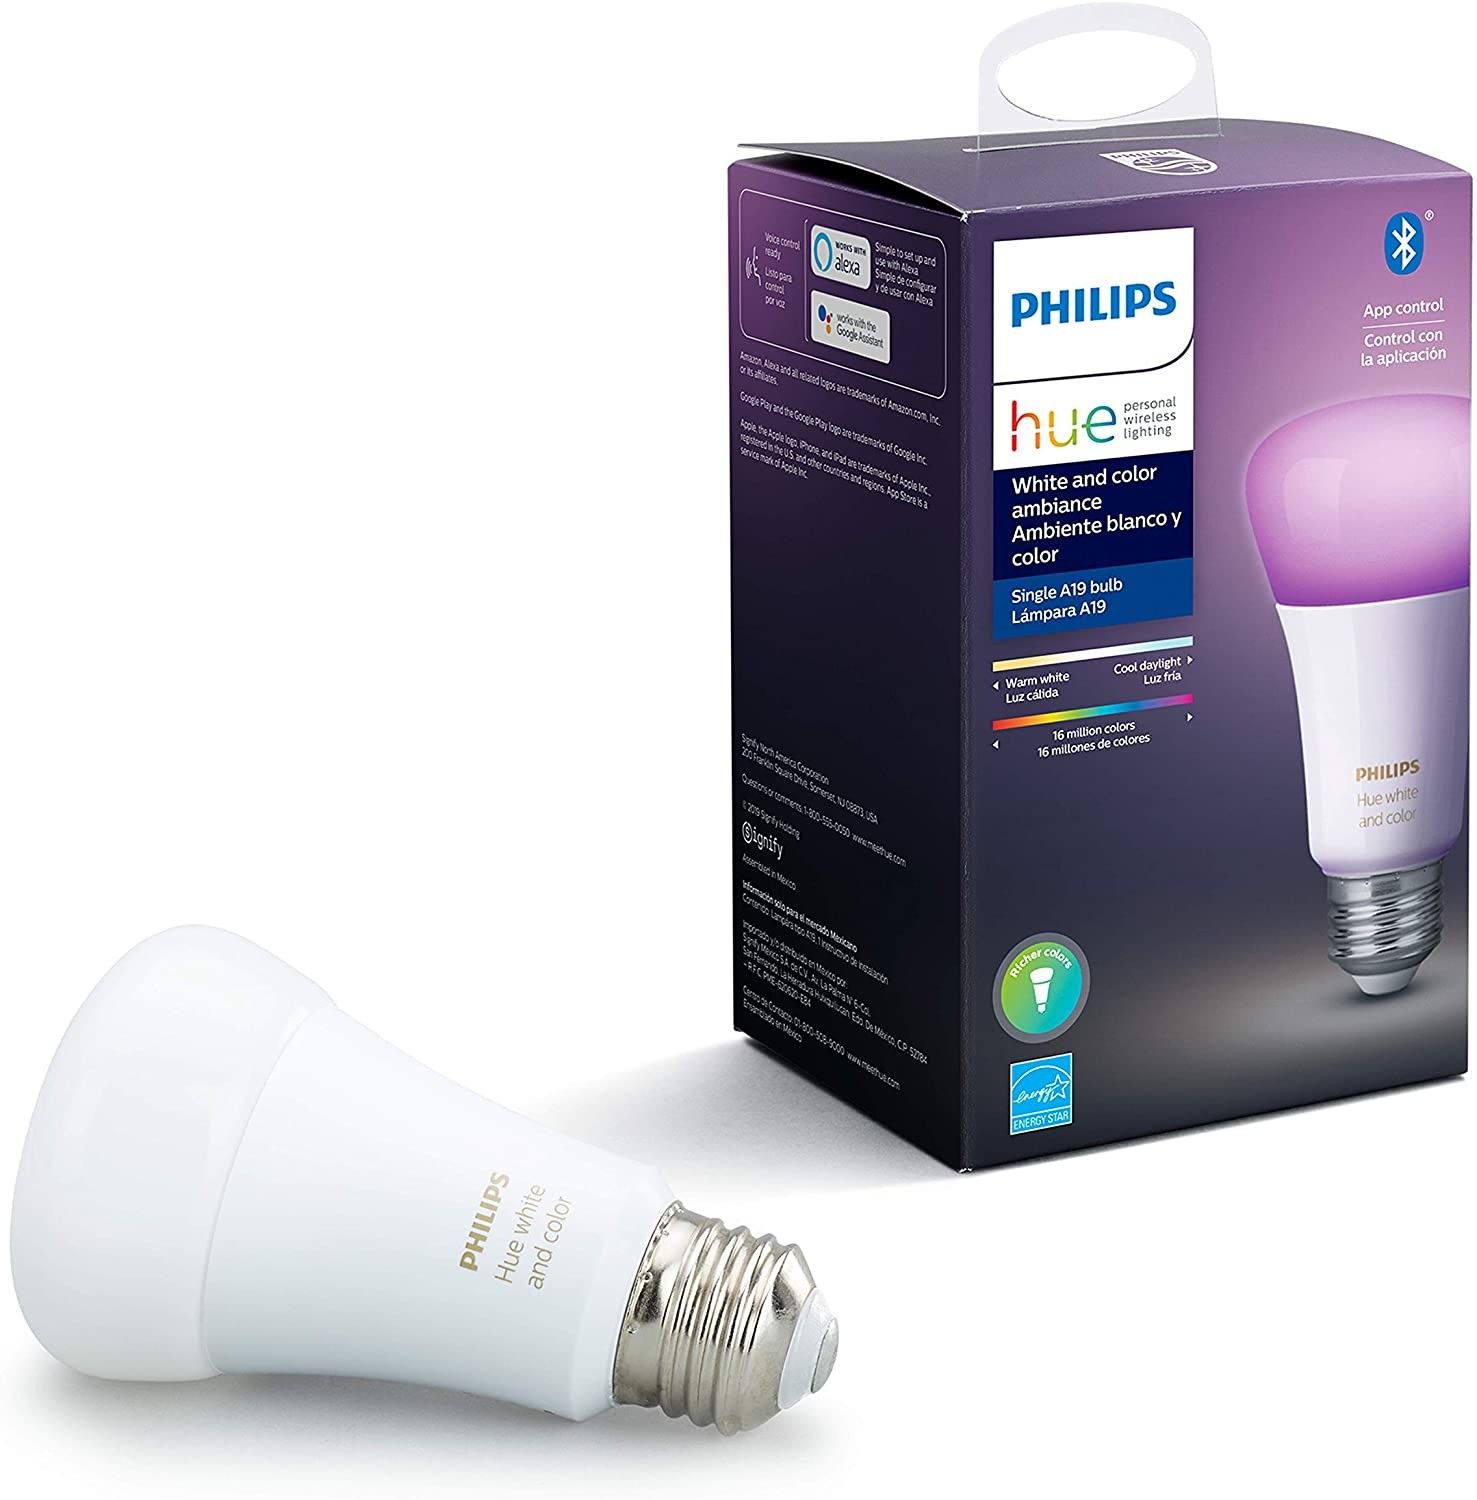 Philips Hue White and Color Ambience